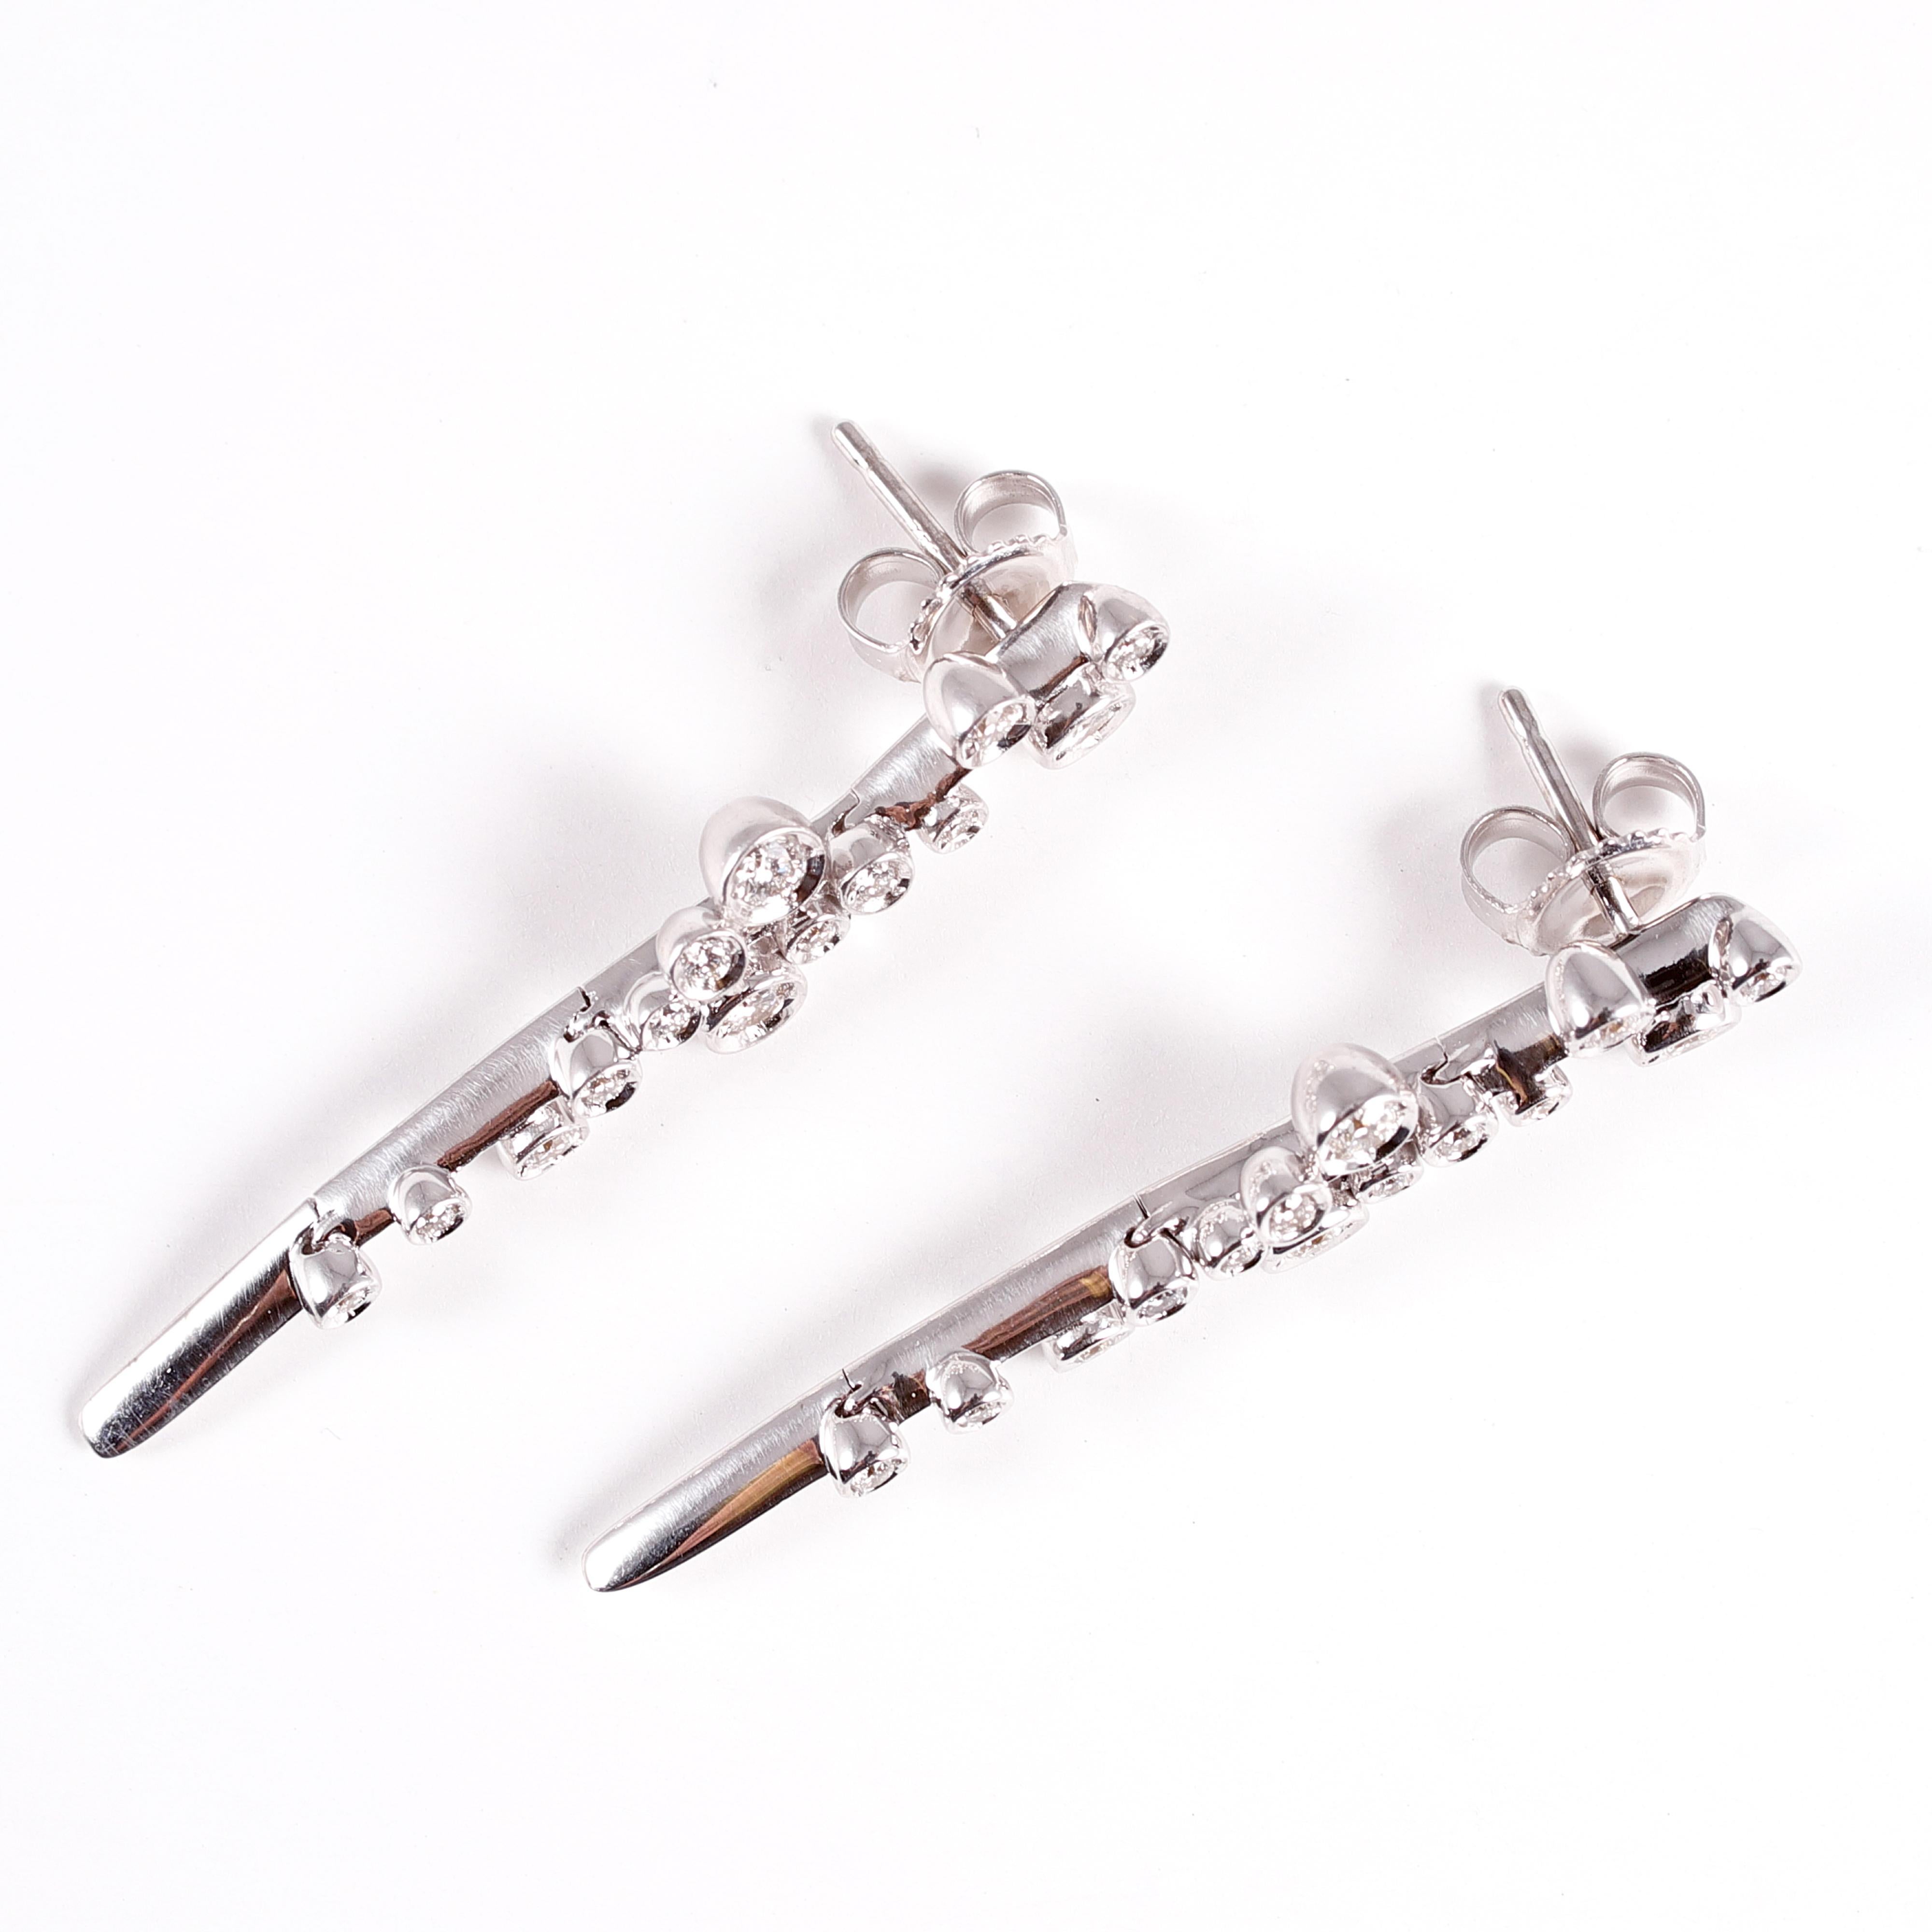 David Morris 0.60 Carat Diamond Earrings from The Astral Collection 4